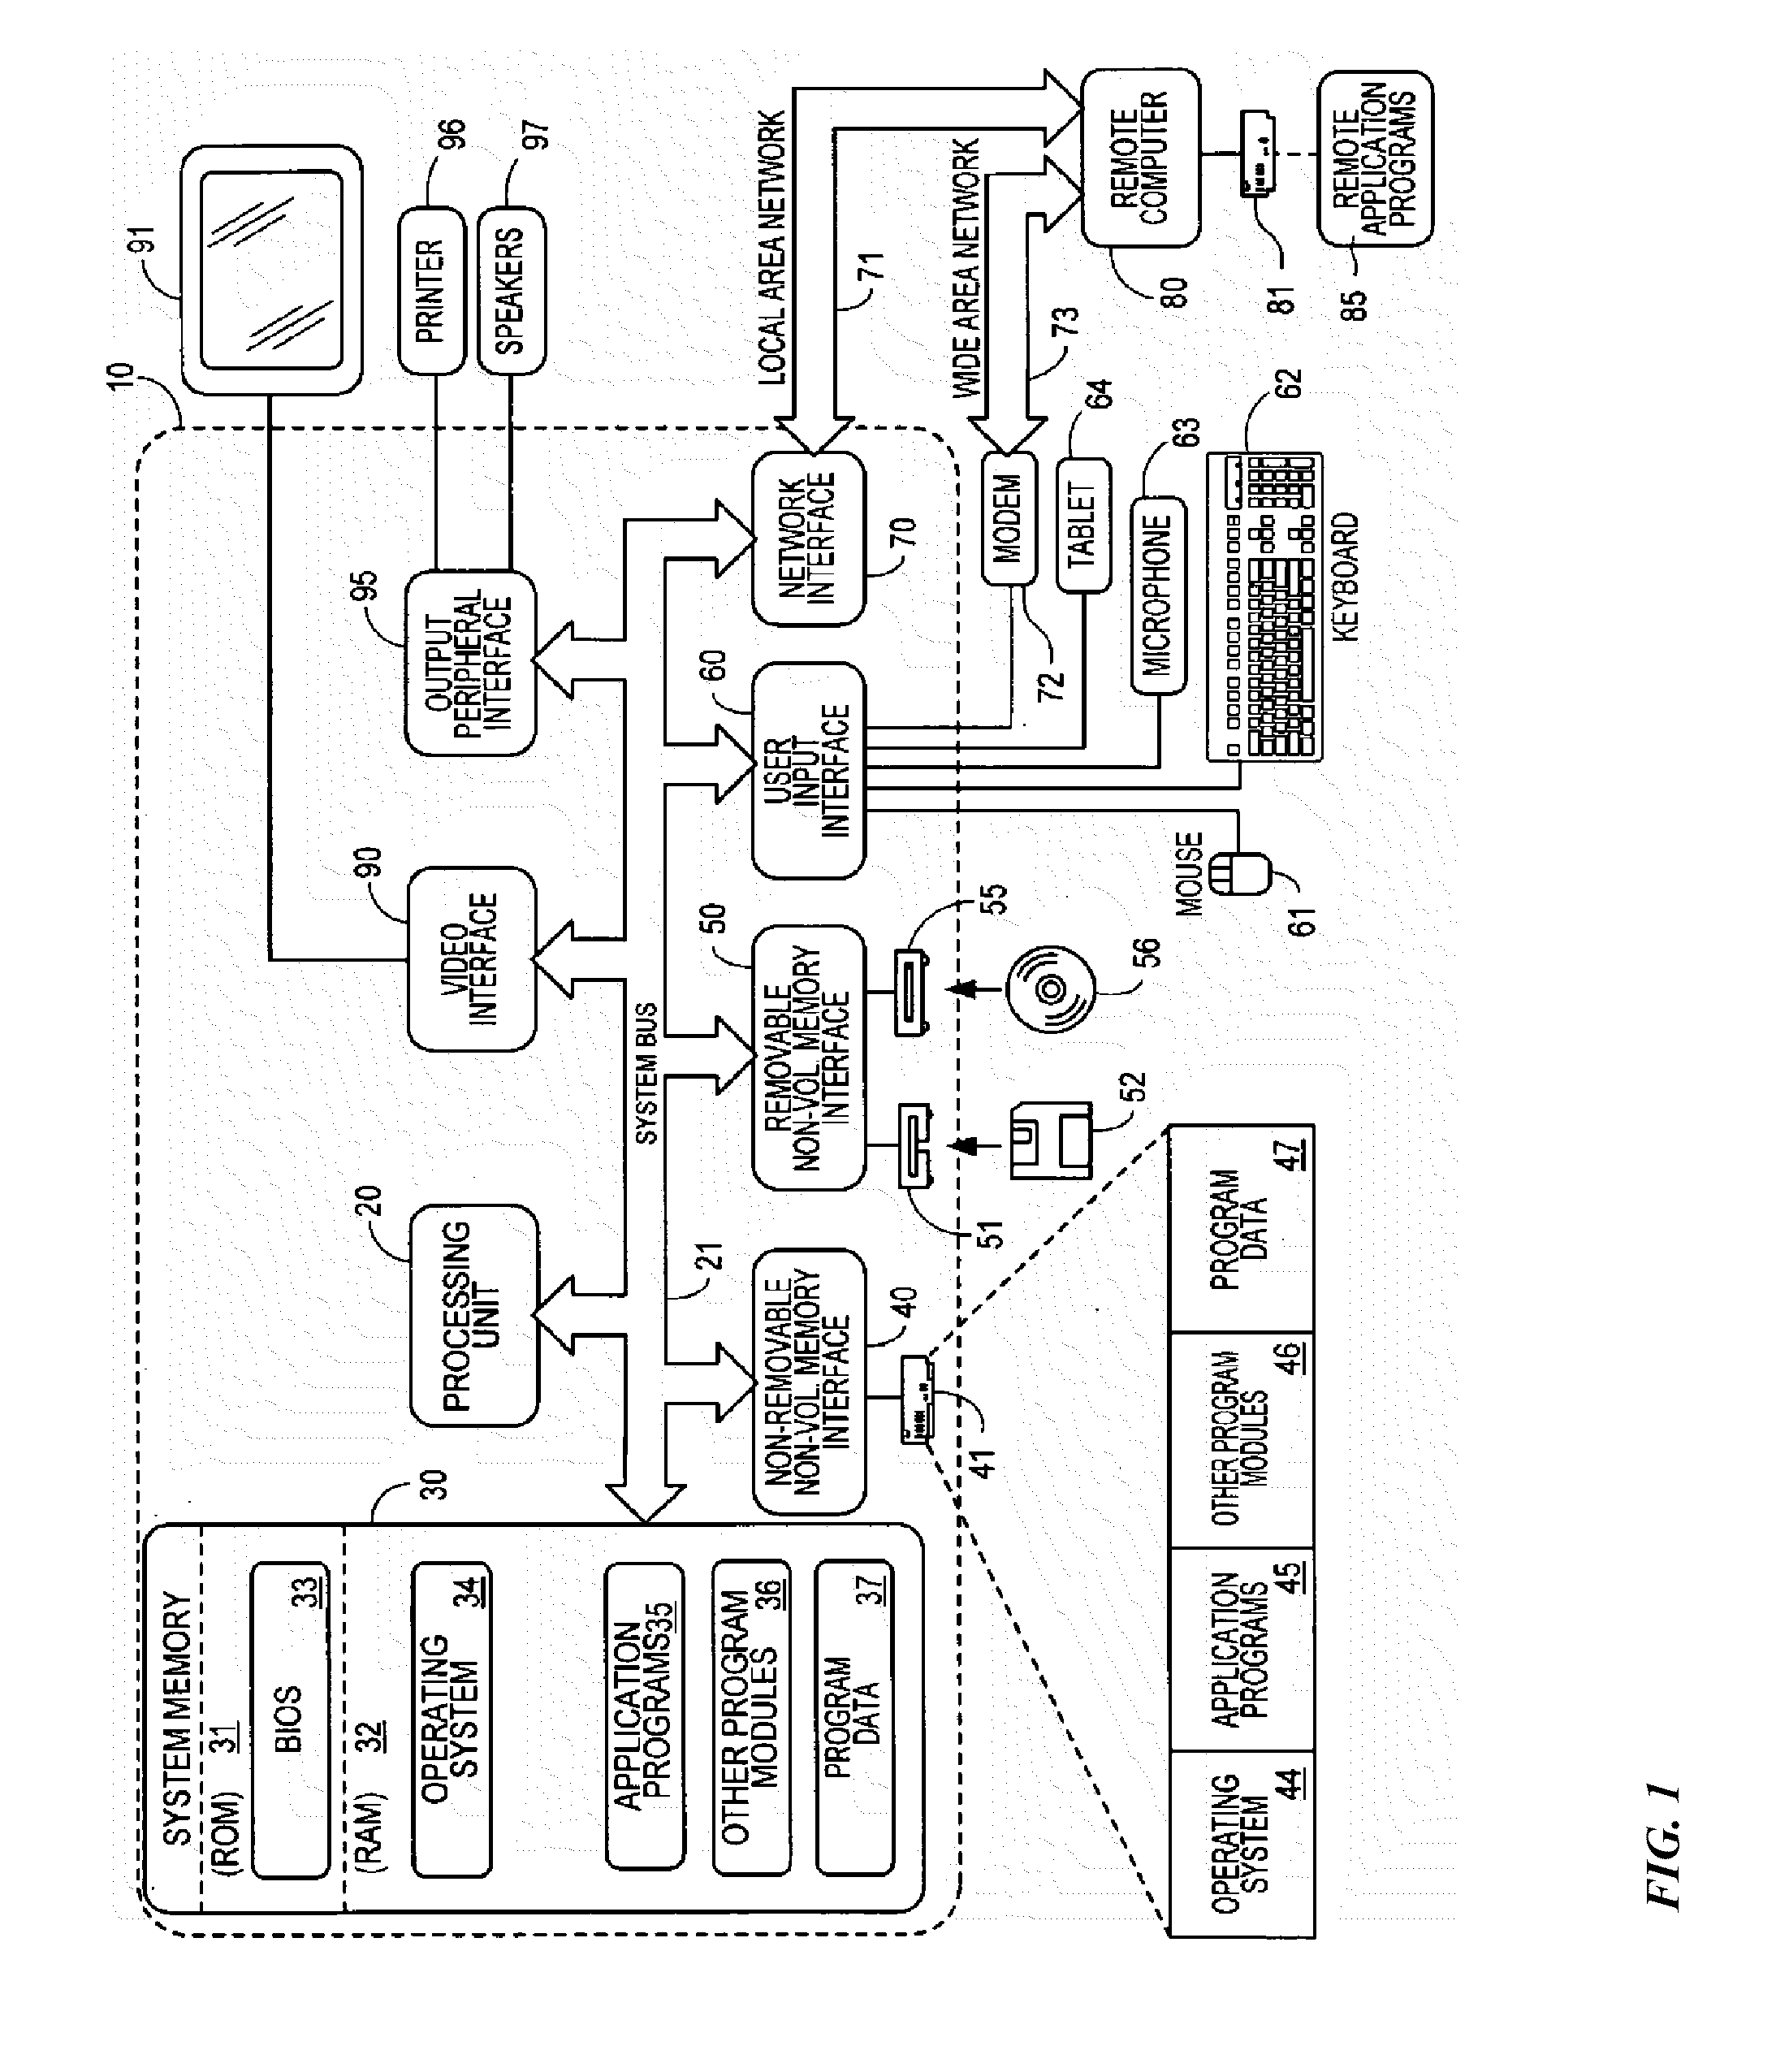 Method and System for Transforming an Integrated Webpage